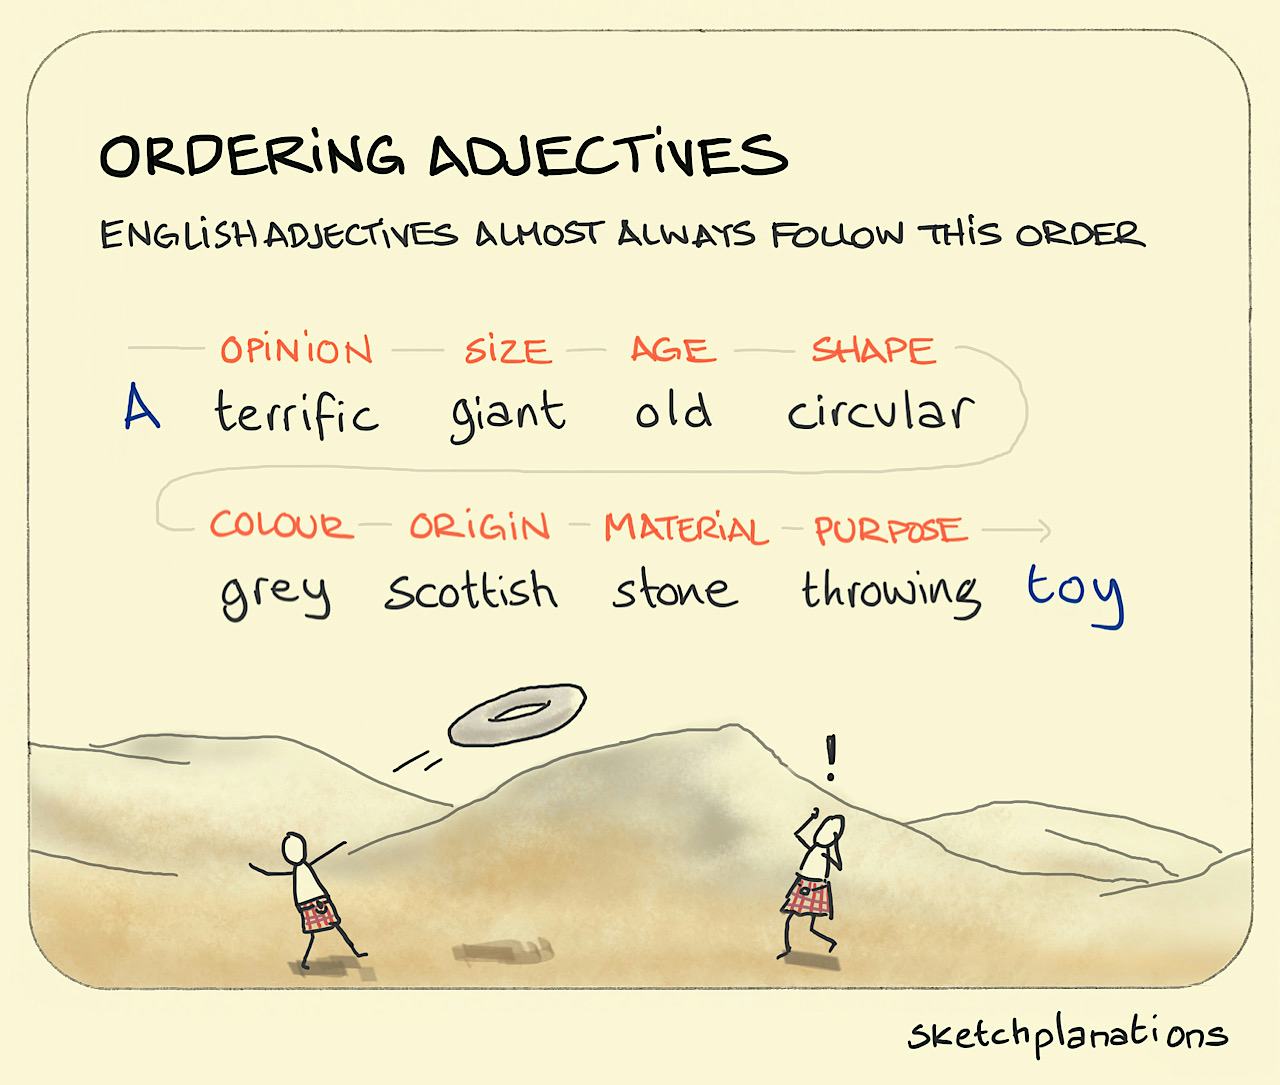 Ordering adjectives - Sketchplanations